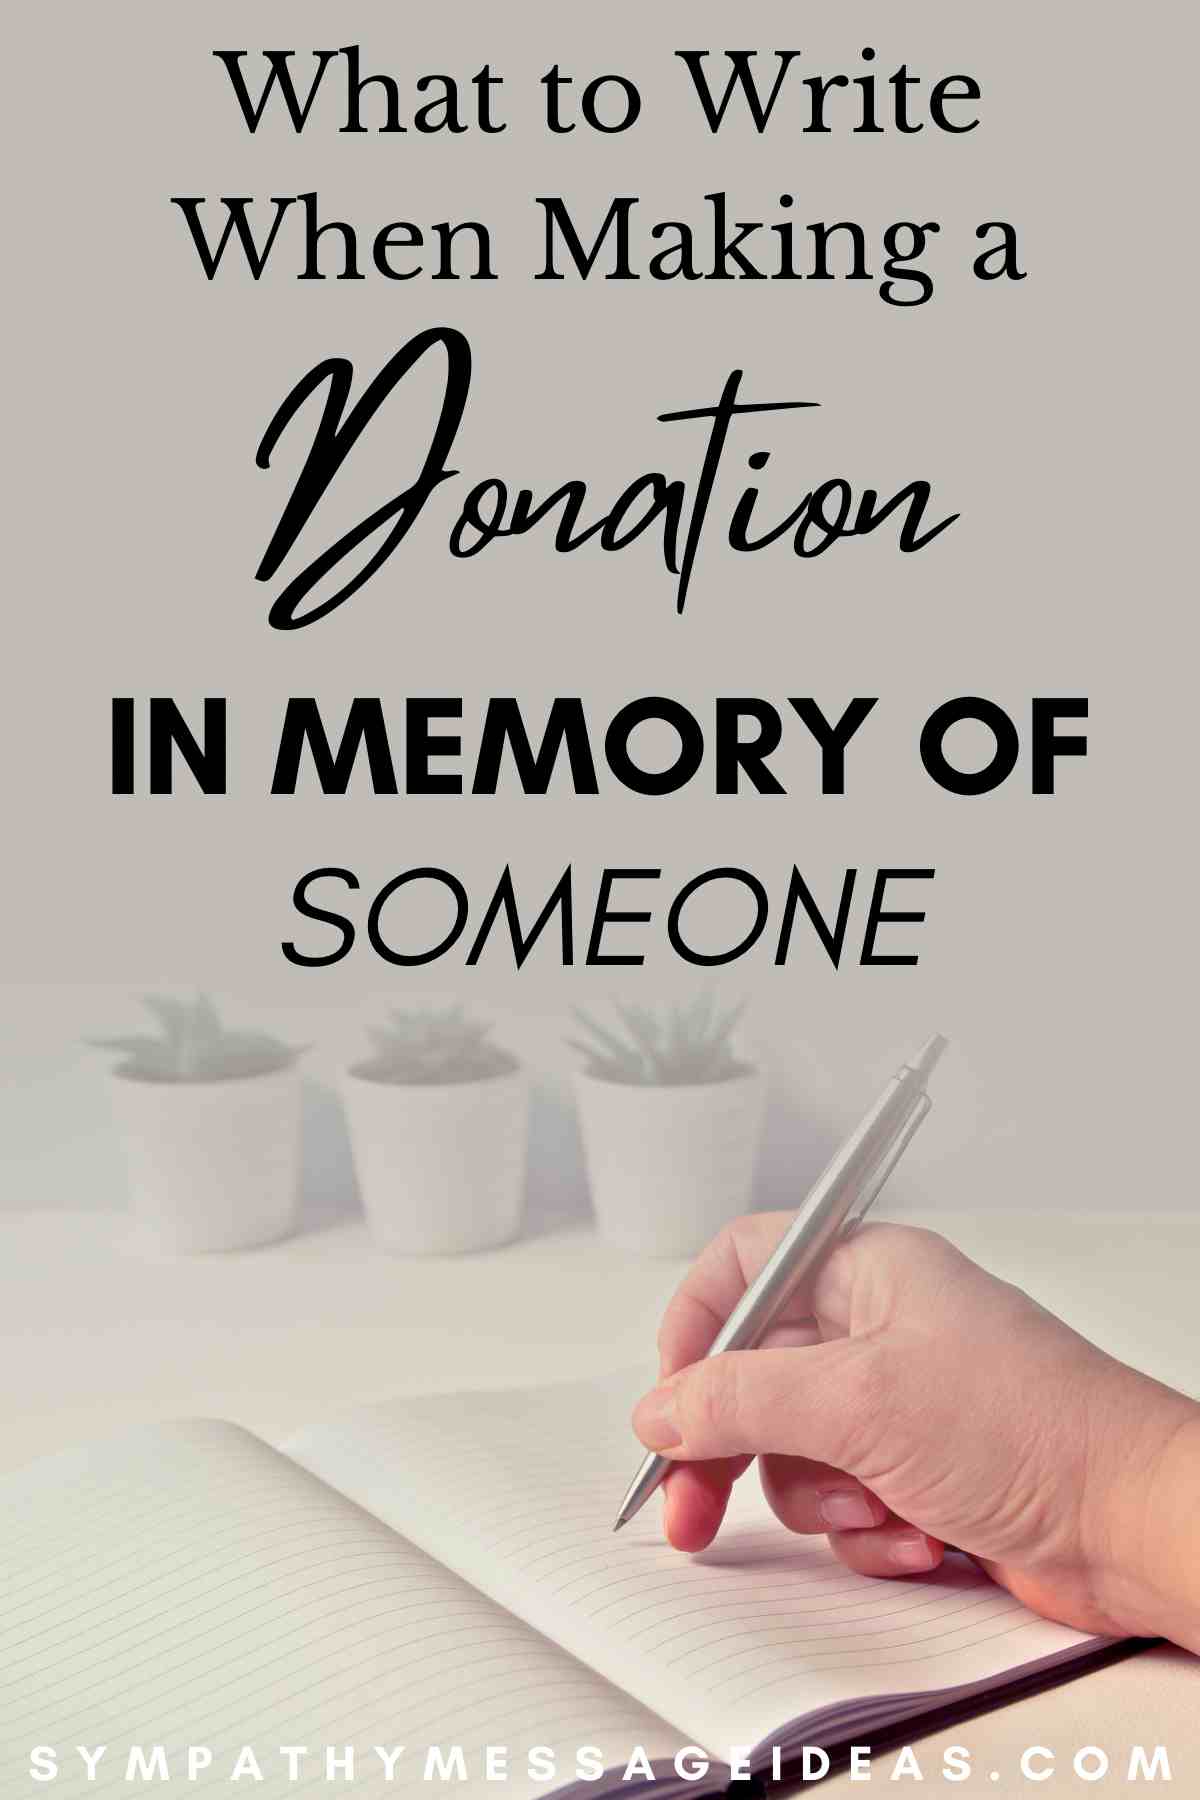 what to write when making a donation in memory of someone